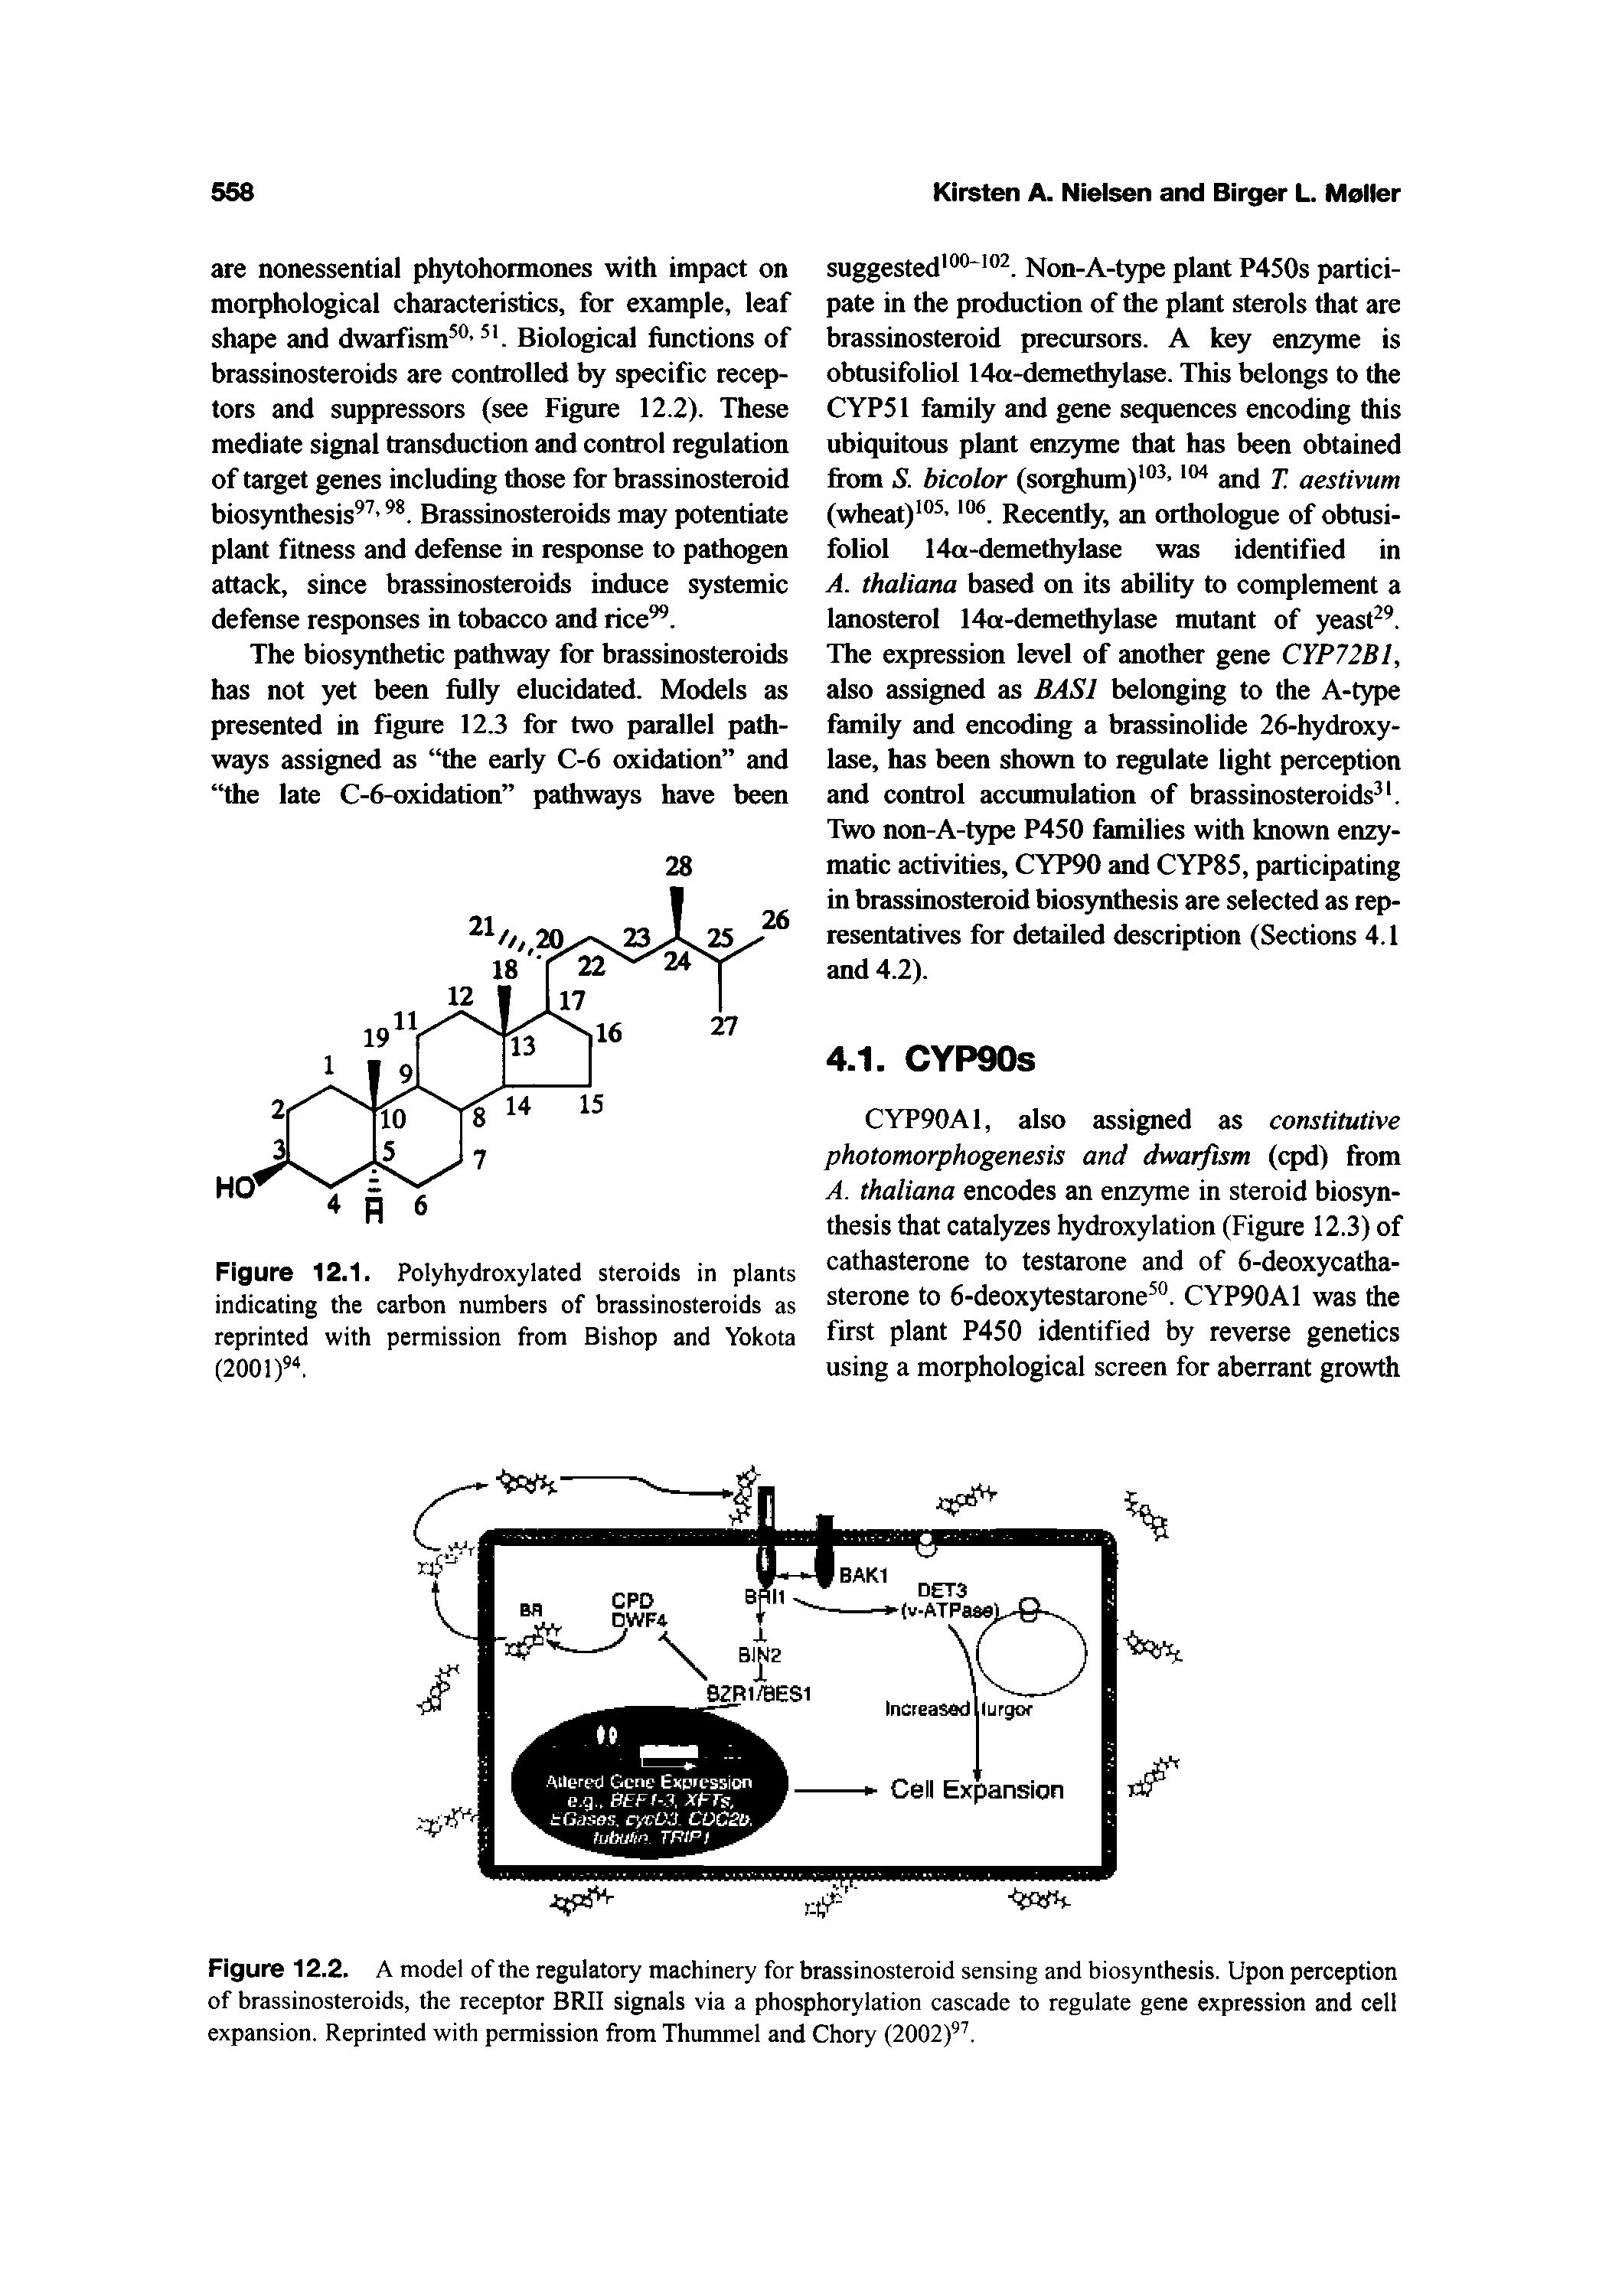 Figure 12.1. Polyhydroxylated steroids in plants indicating the carbon numbers of brassinosteroids as reprinted with permission from Bishop and Yokota (2001) .